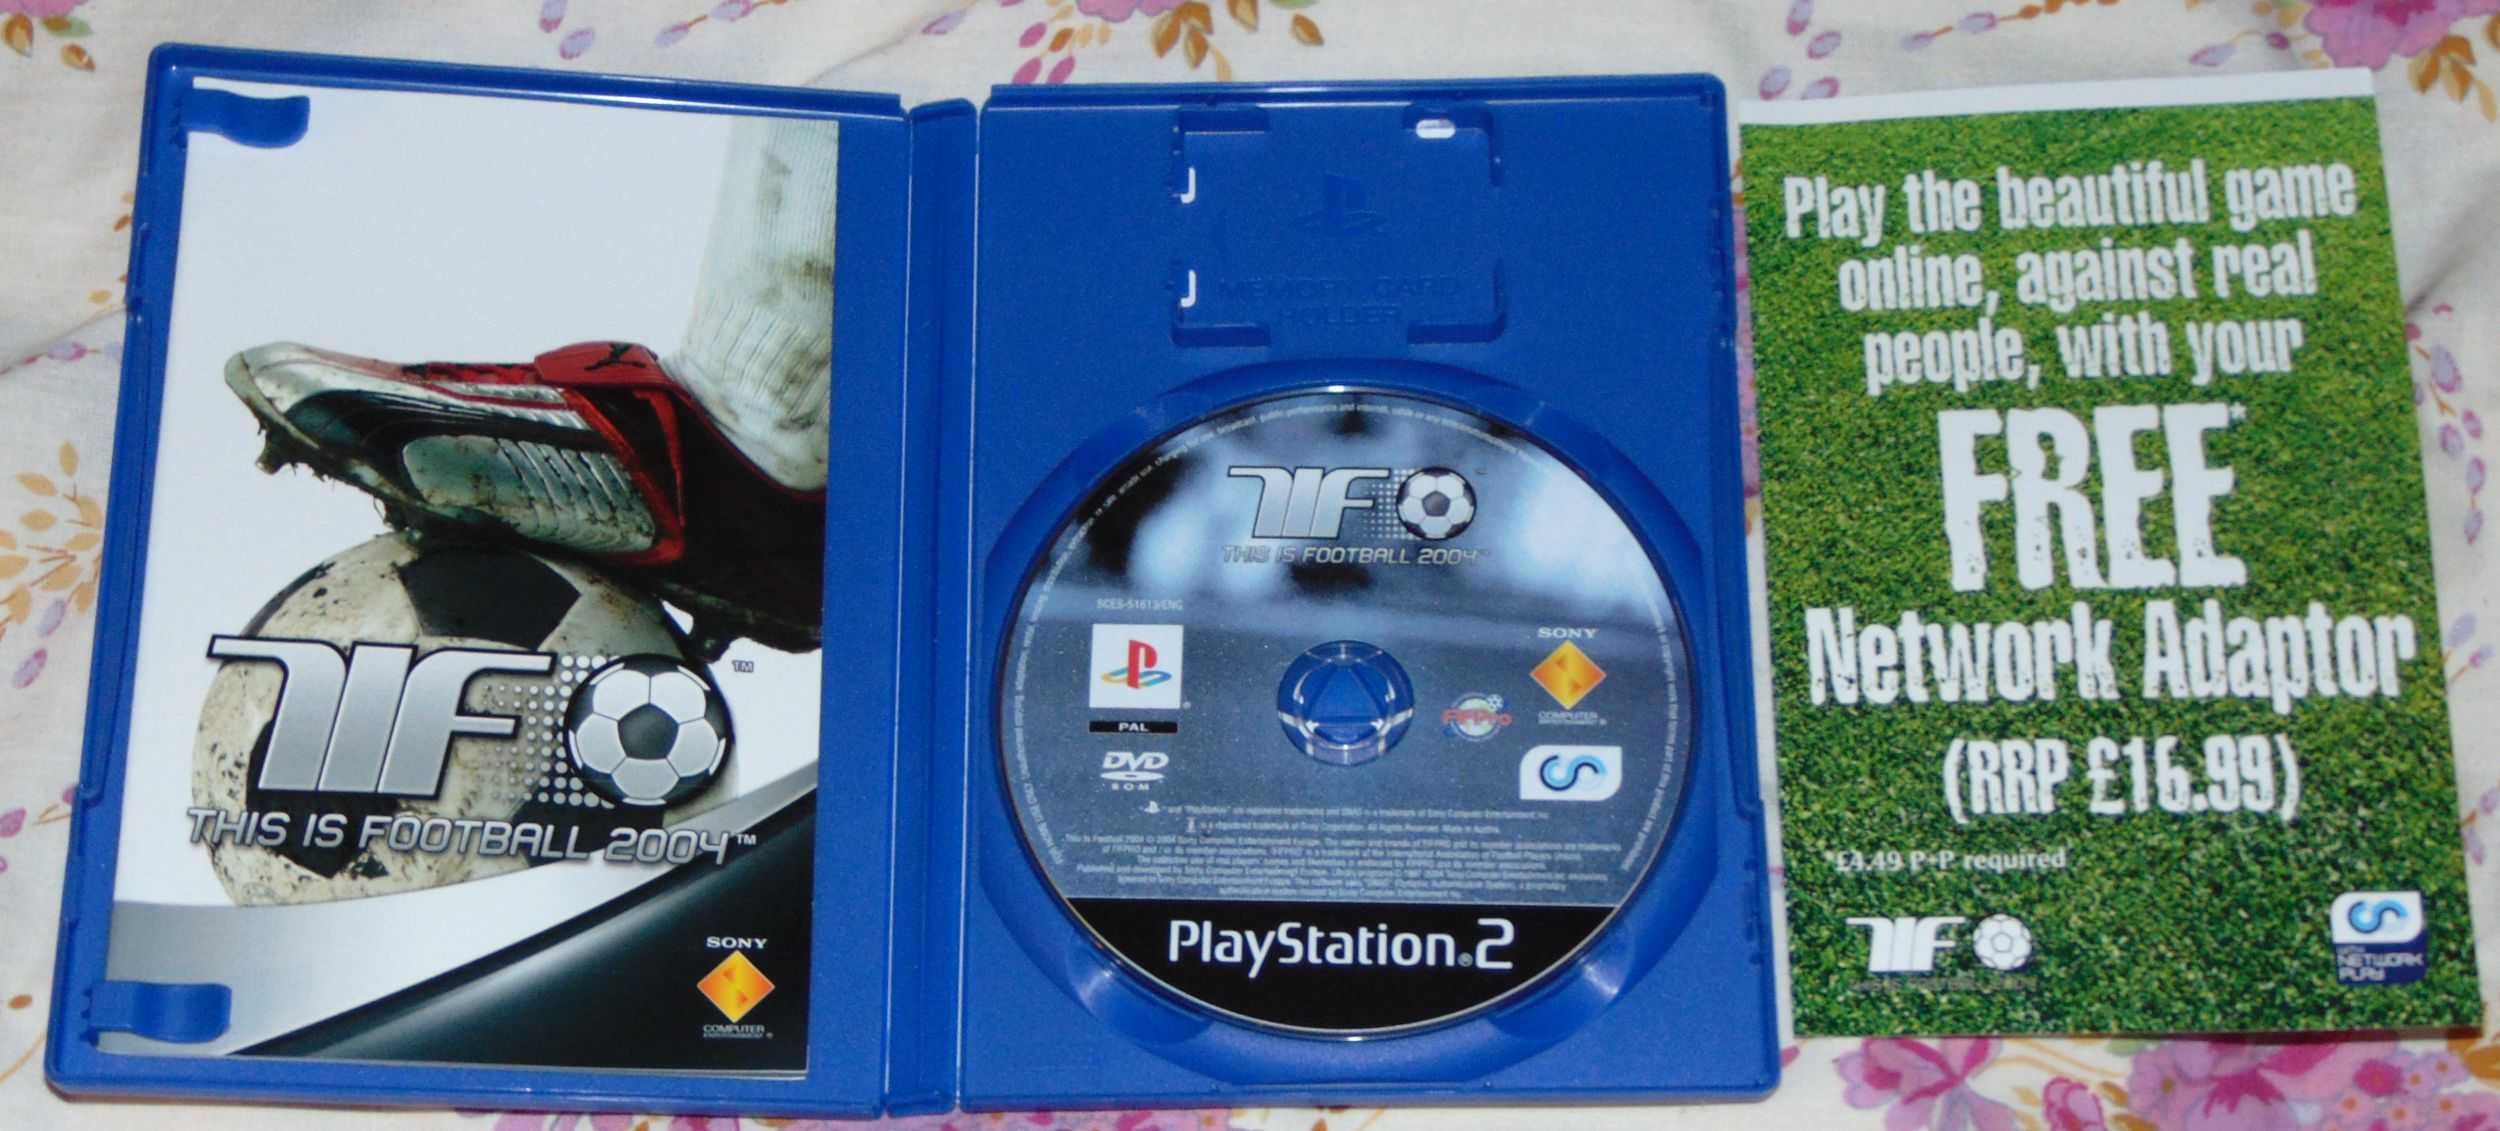 This Is Football 2004 Gra na PlayStation 2 Stan jak nowy